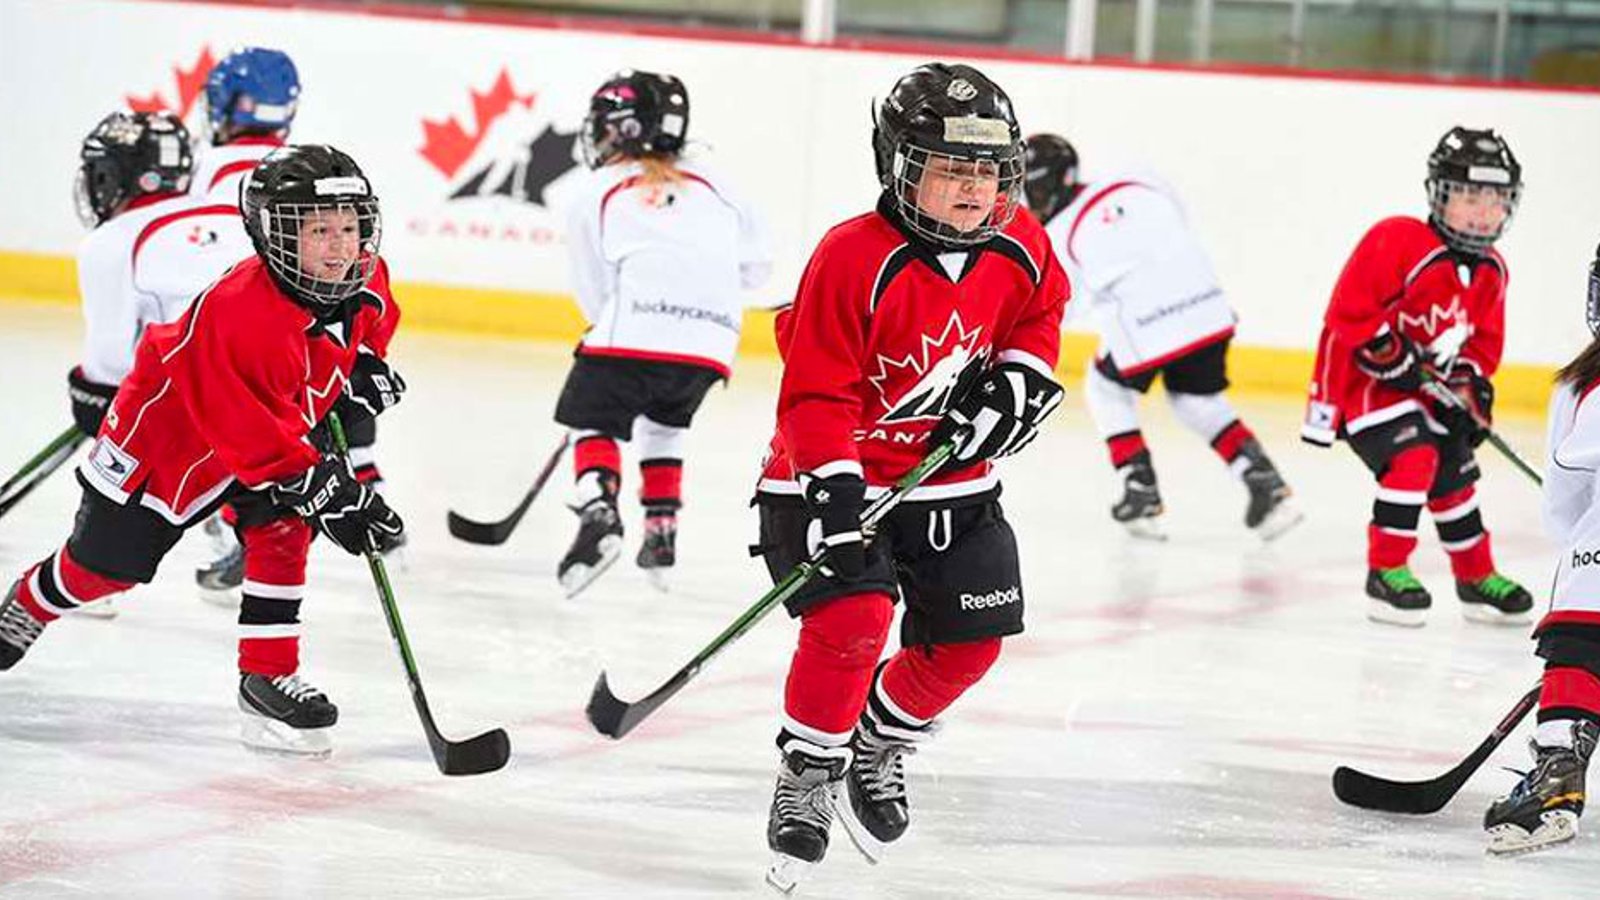 Parents say they've “lost total trust” in Hockey Canada following recent news